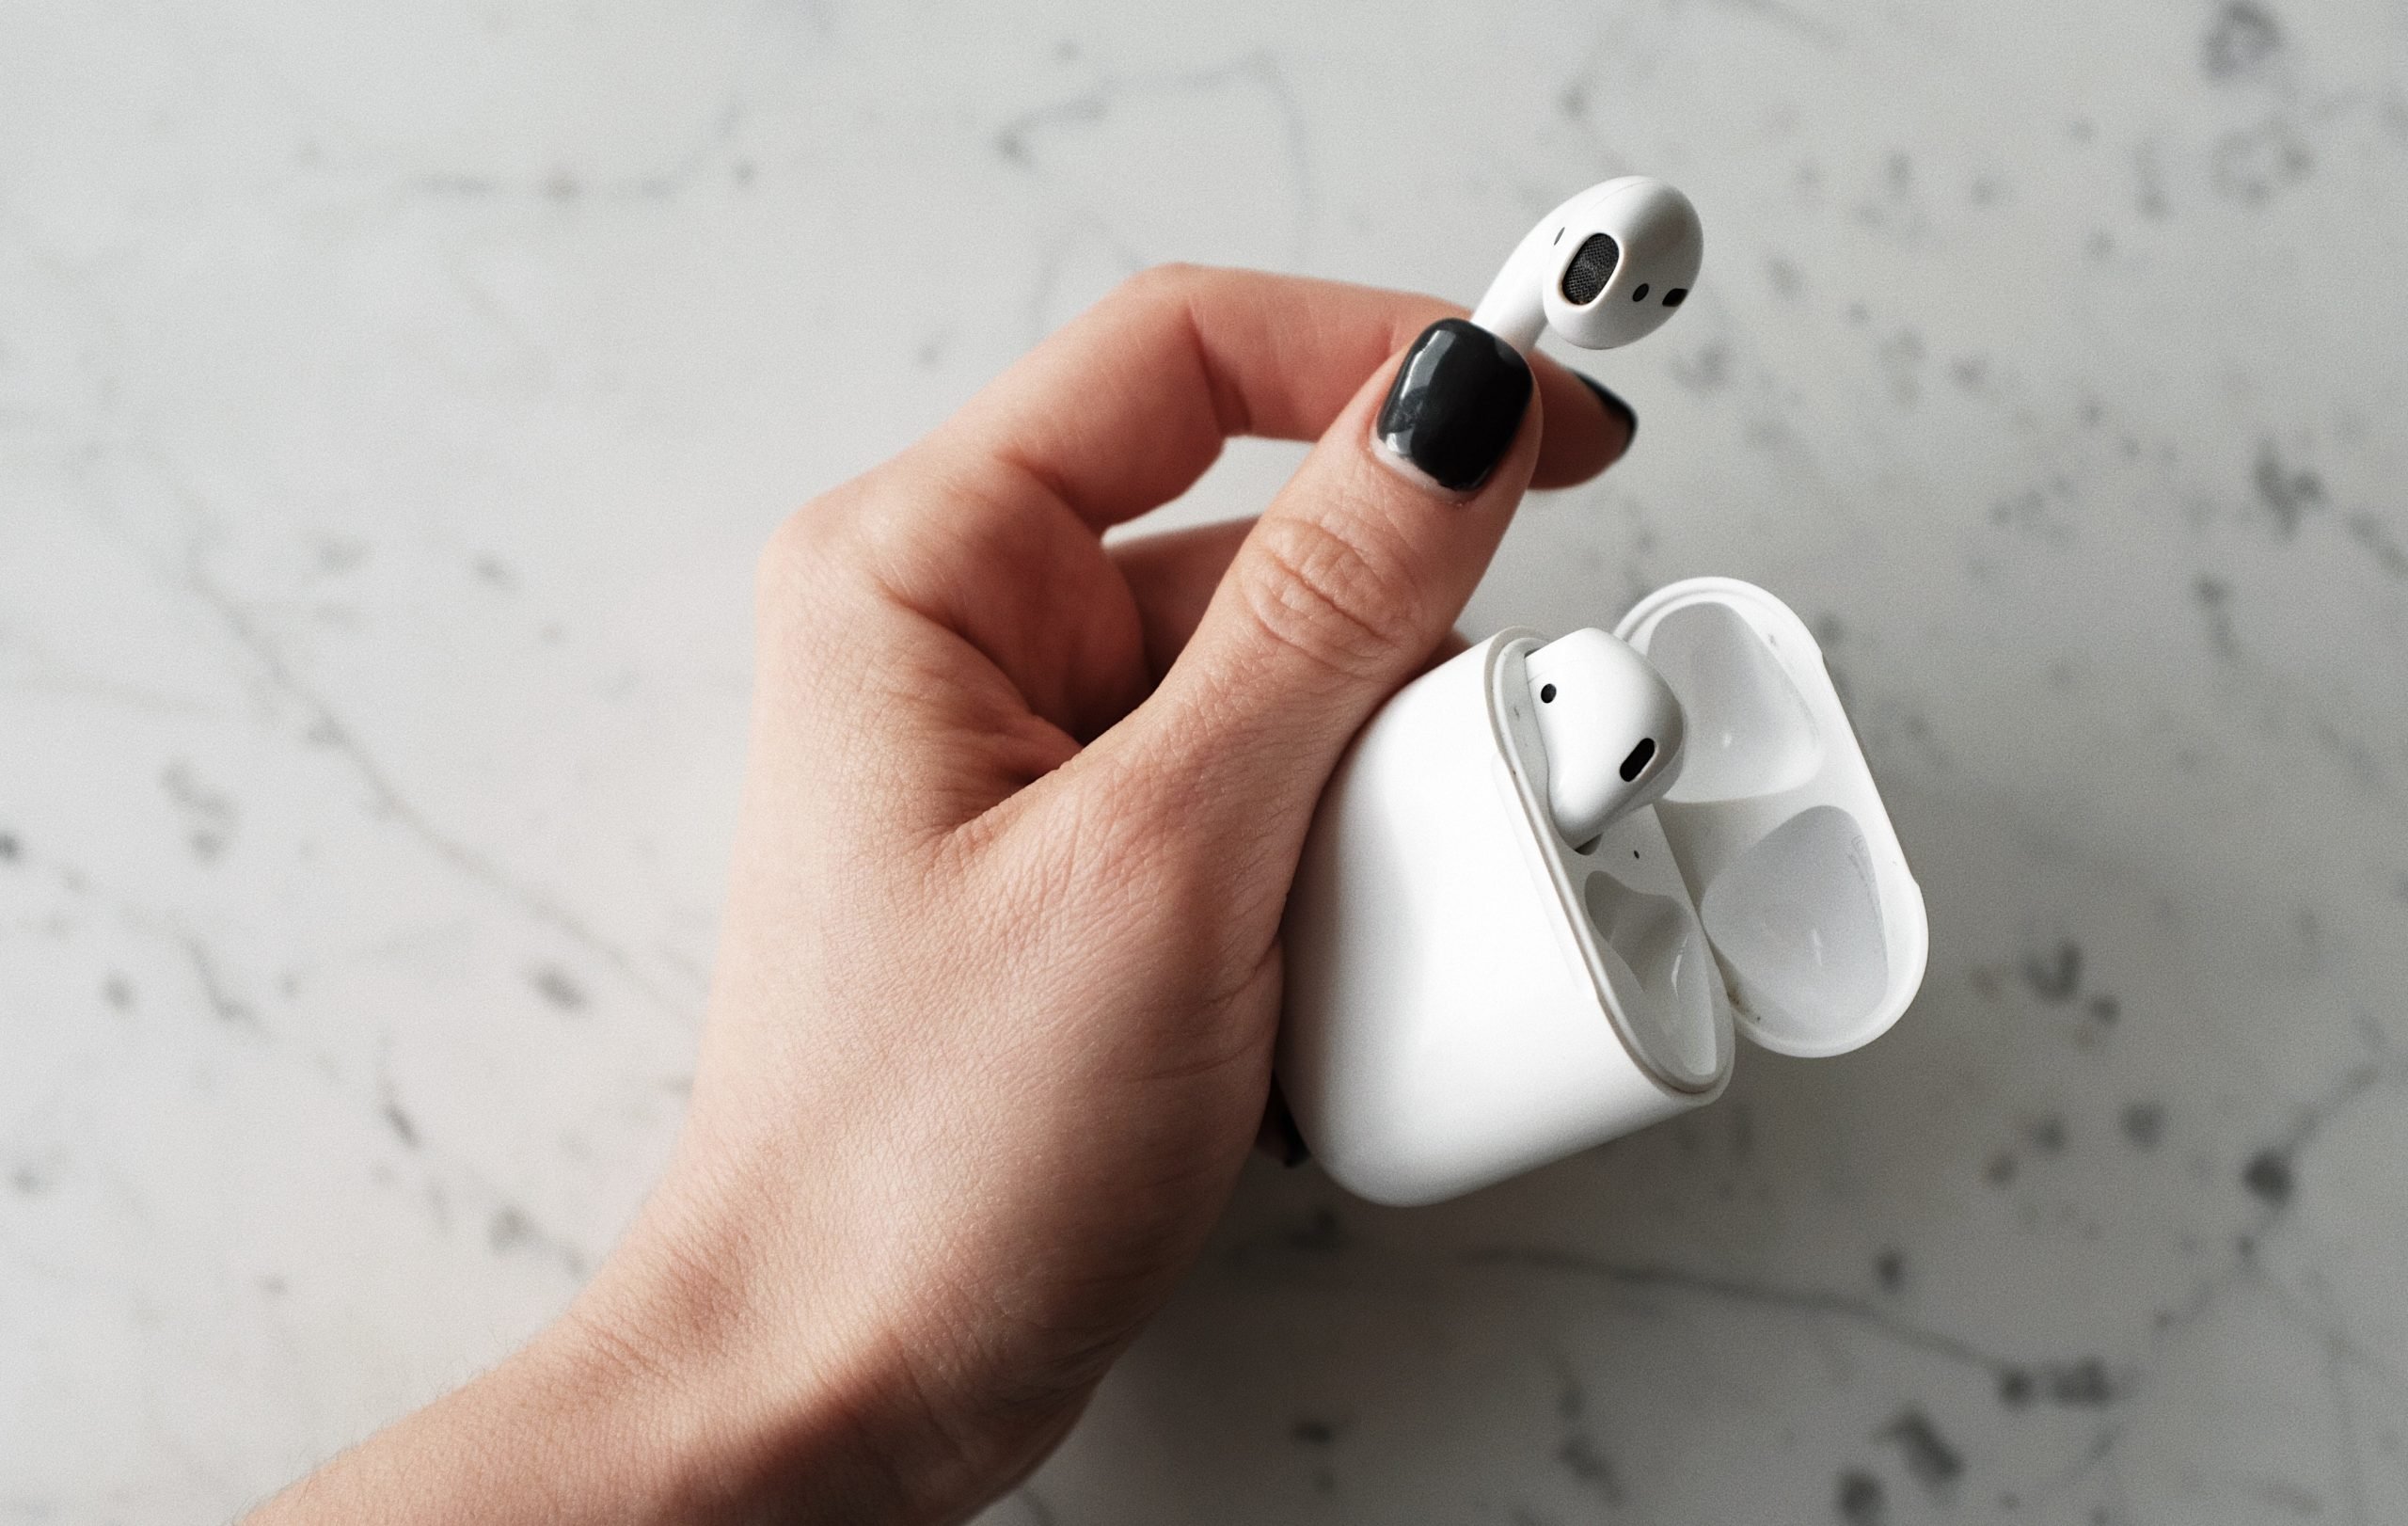 One AirPod Not Charging (From: Pexels)